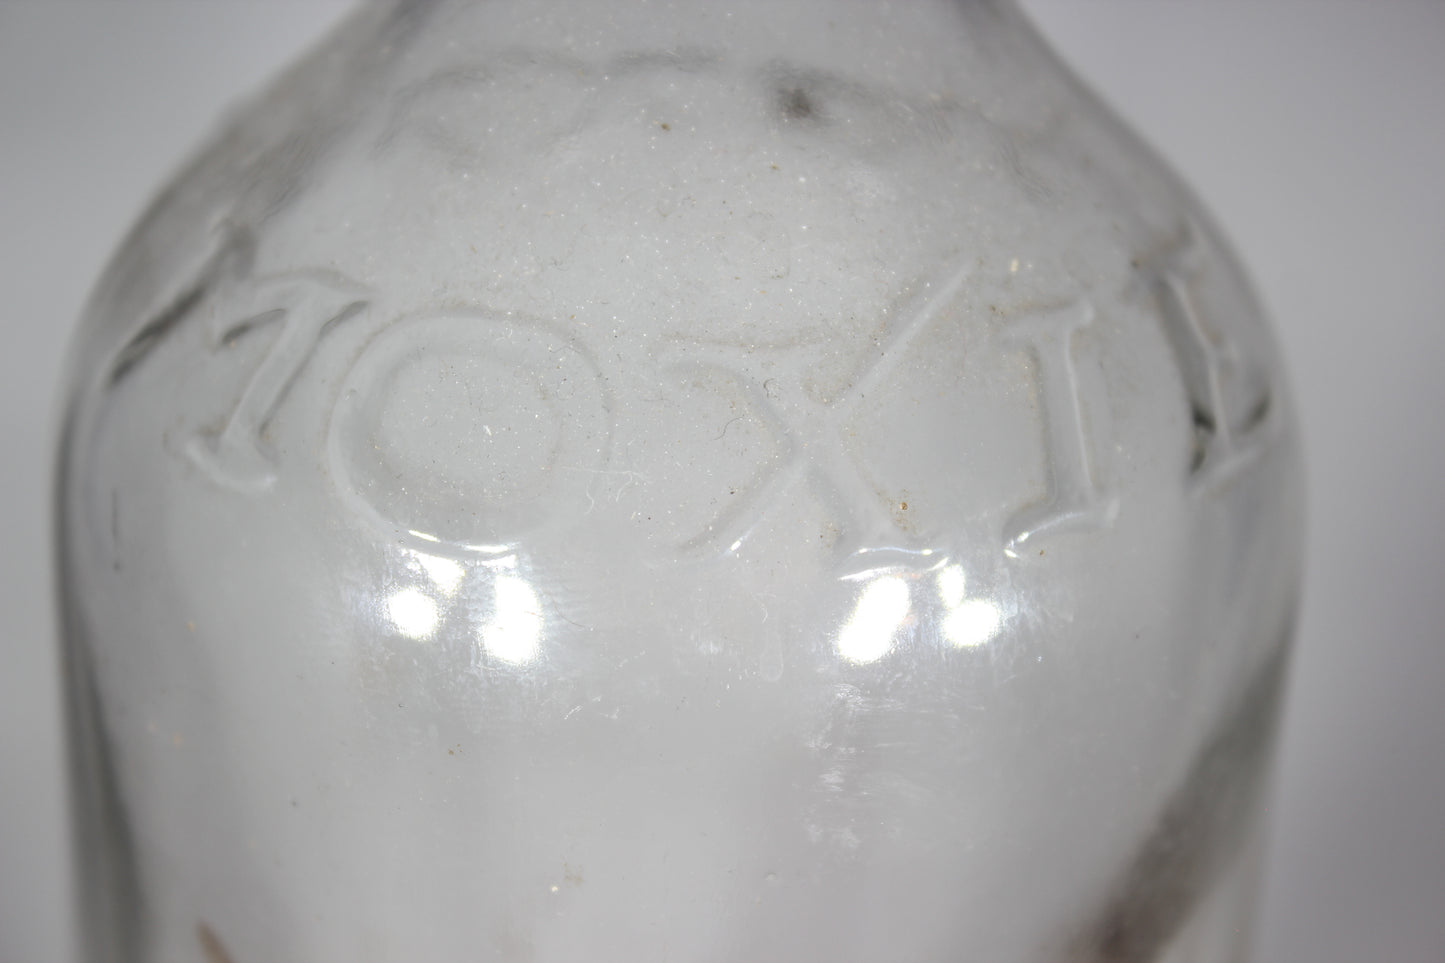 Vintage Moxie Glass Soda Bottle with Partial Label